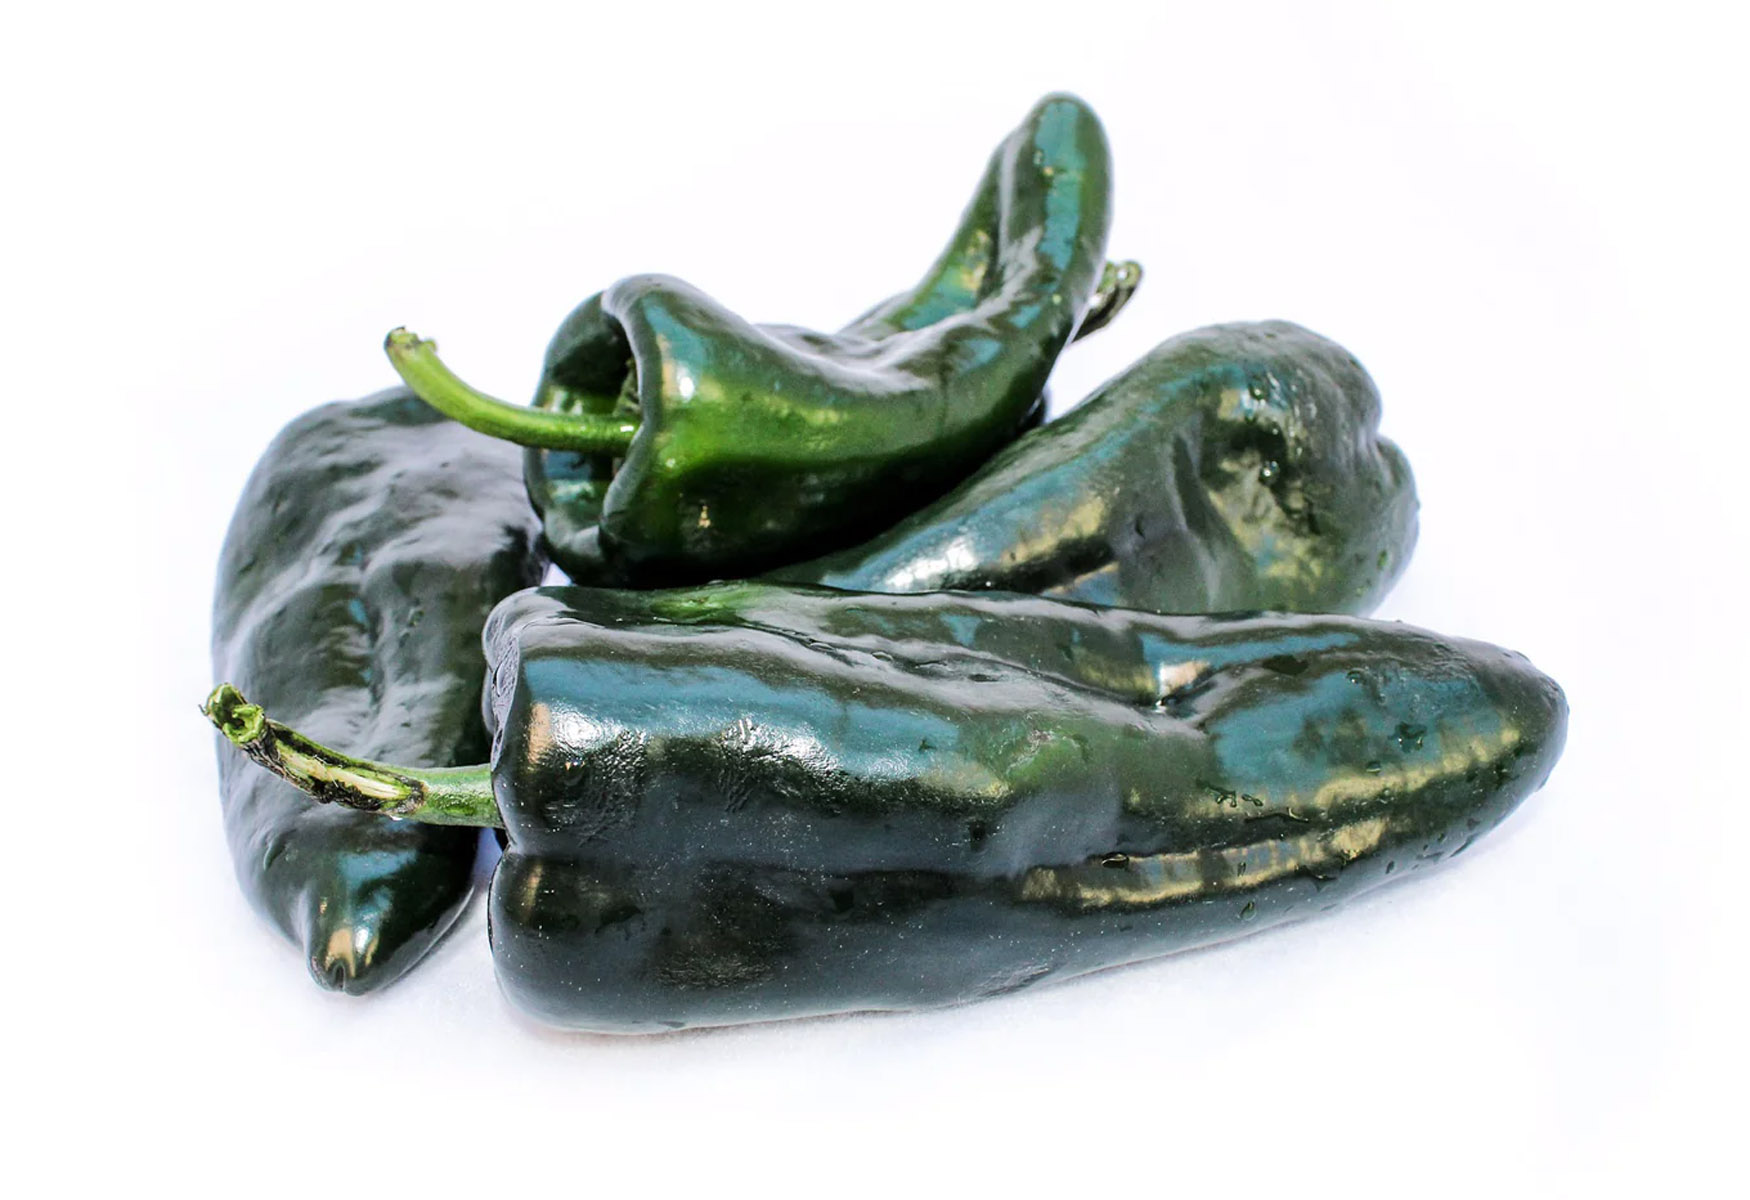 18-poblano-pepper-nutrition-facts